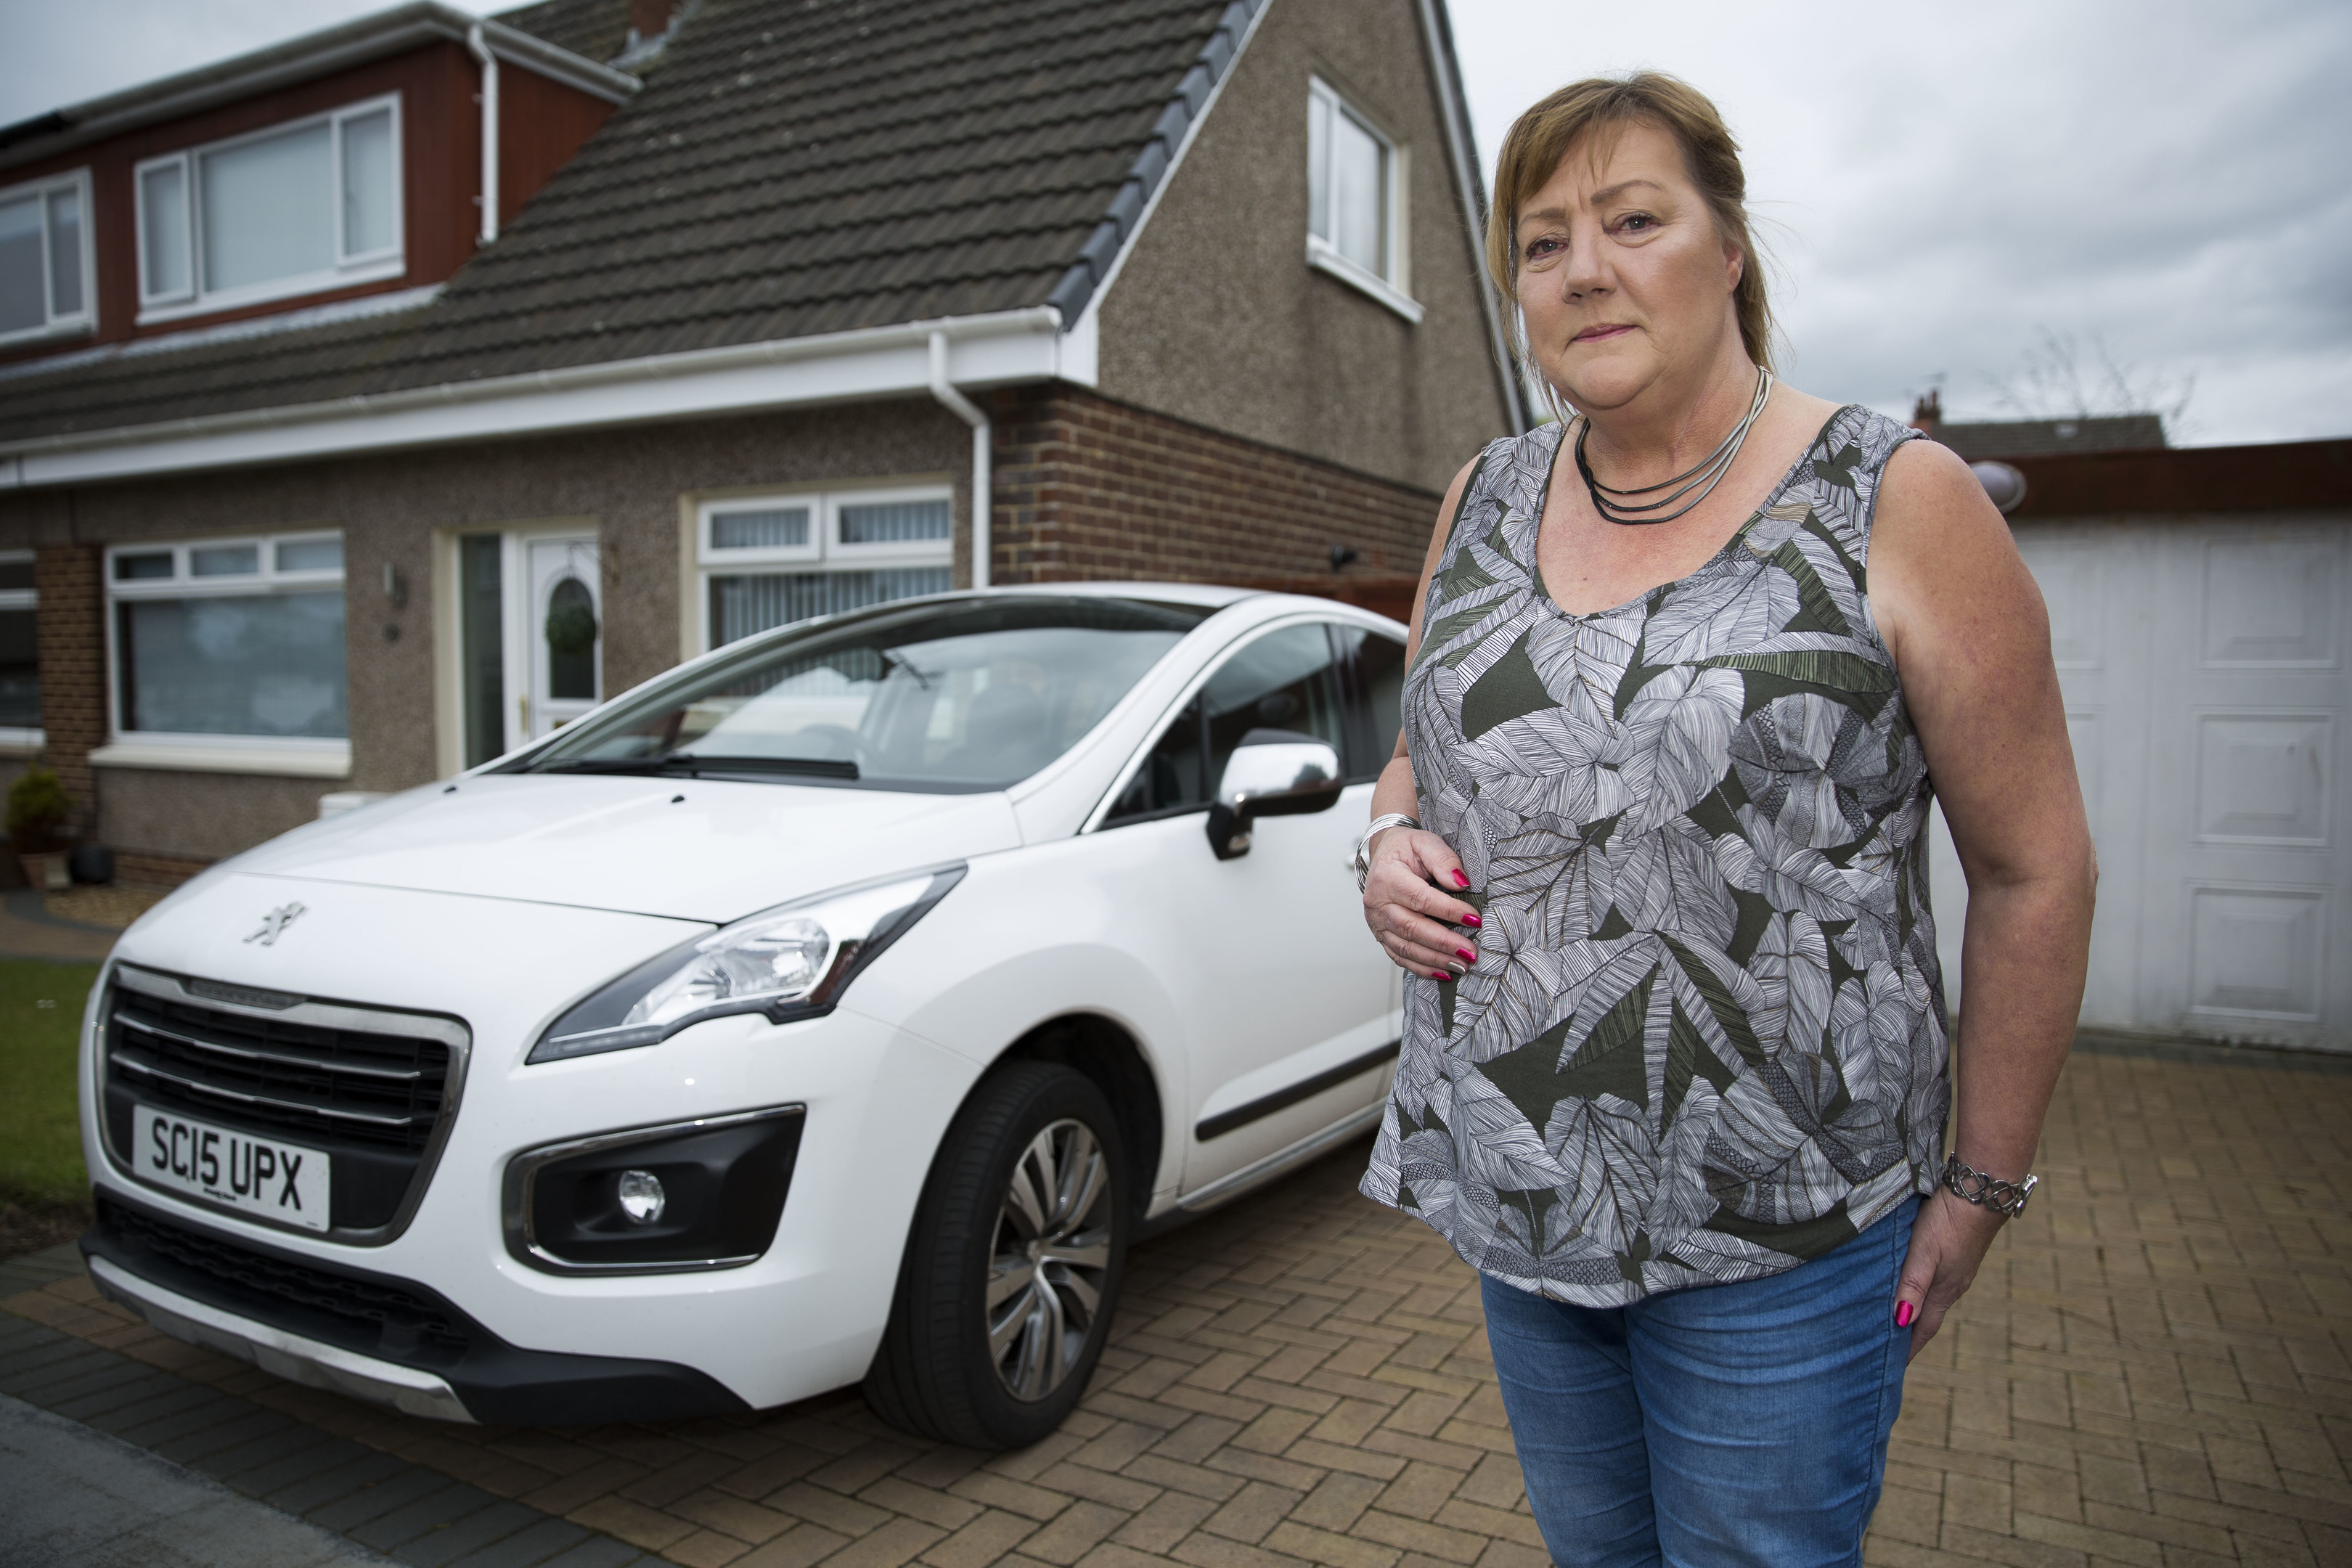 A snap reassessment of Jan's benefits ruled she did not need the car to live independently (Jamie Williamson)